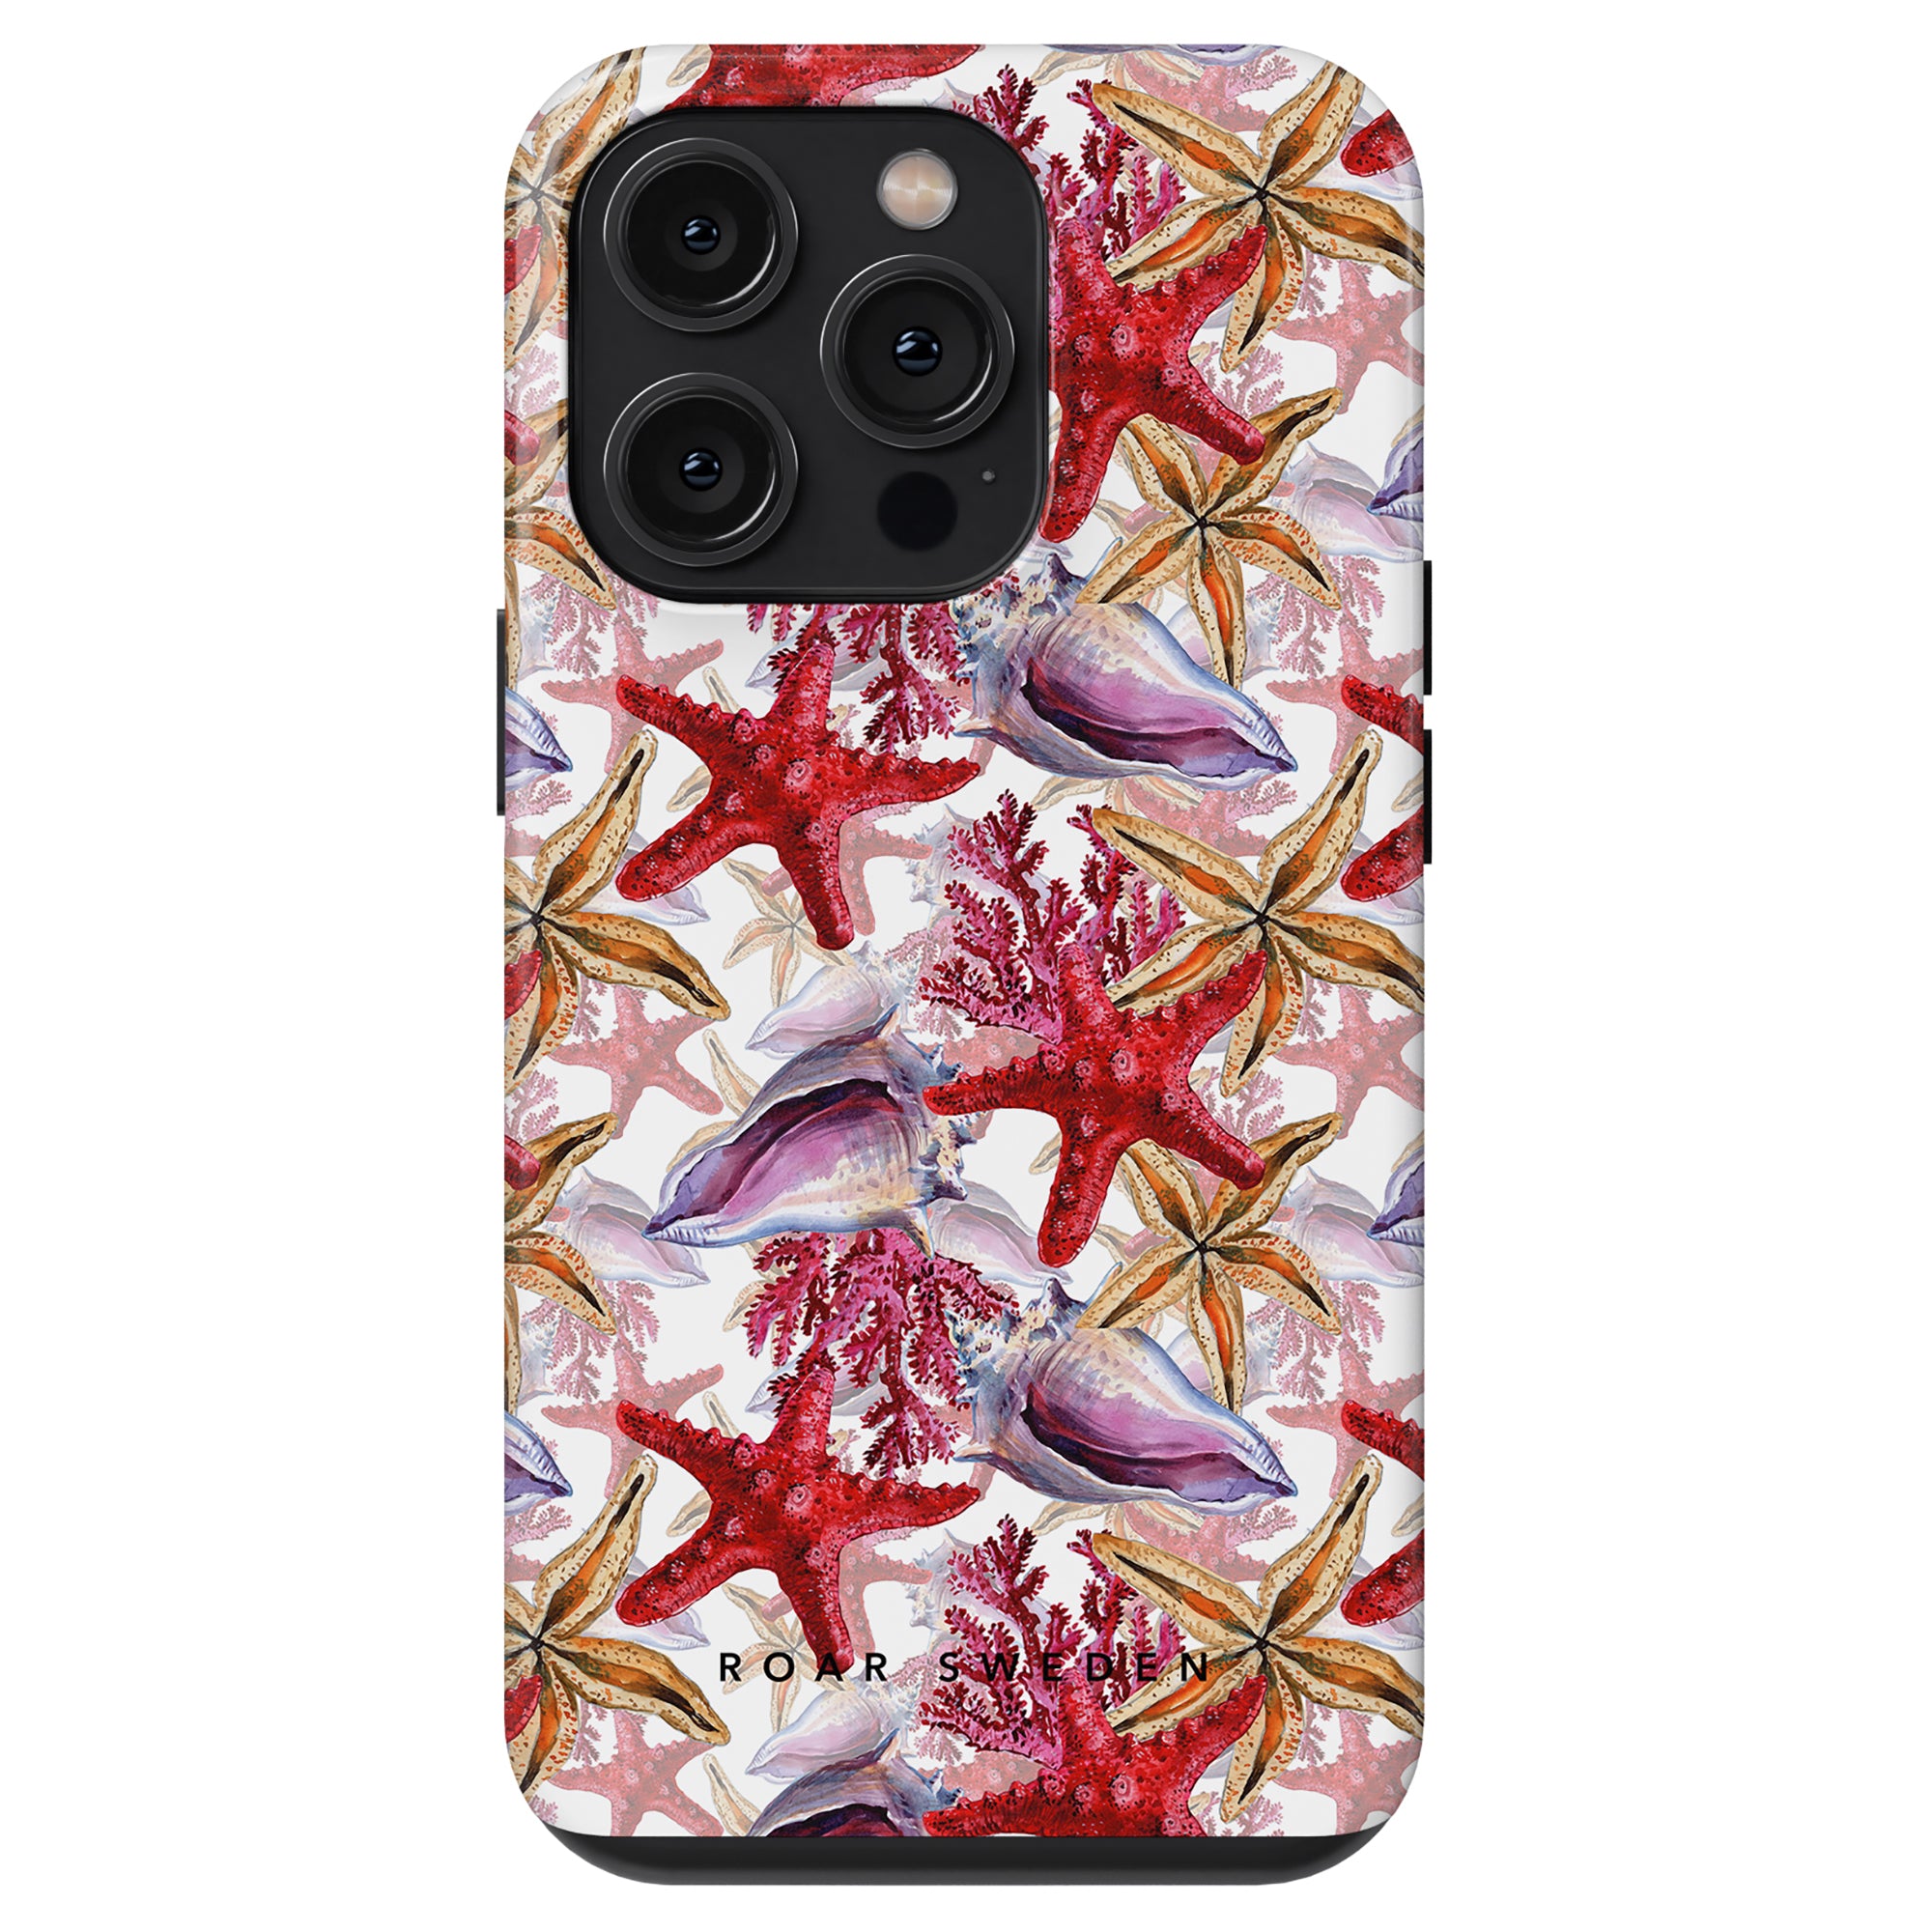 A Coral Reef - Tough Case from the ocean collection, featuring coral reef, starfish, and seashells design, compatible with an iPhone with dual cameras.